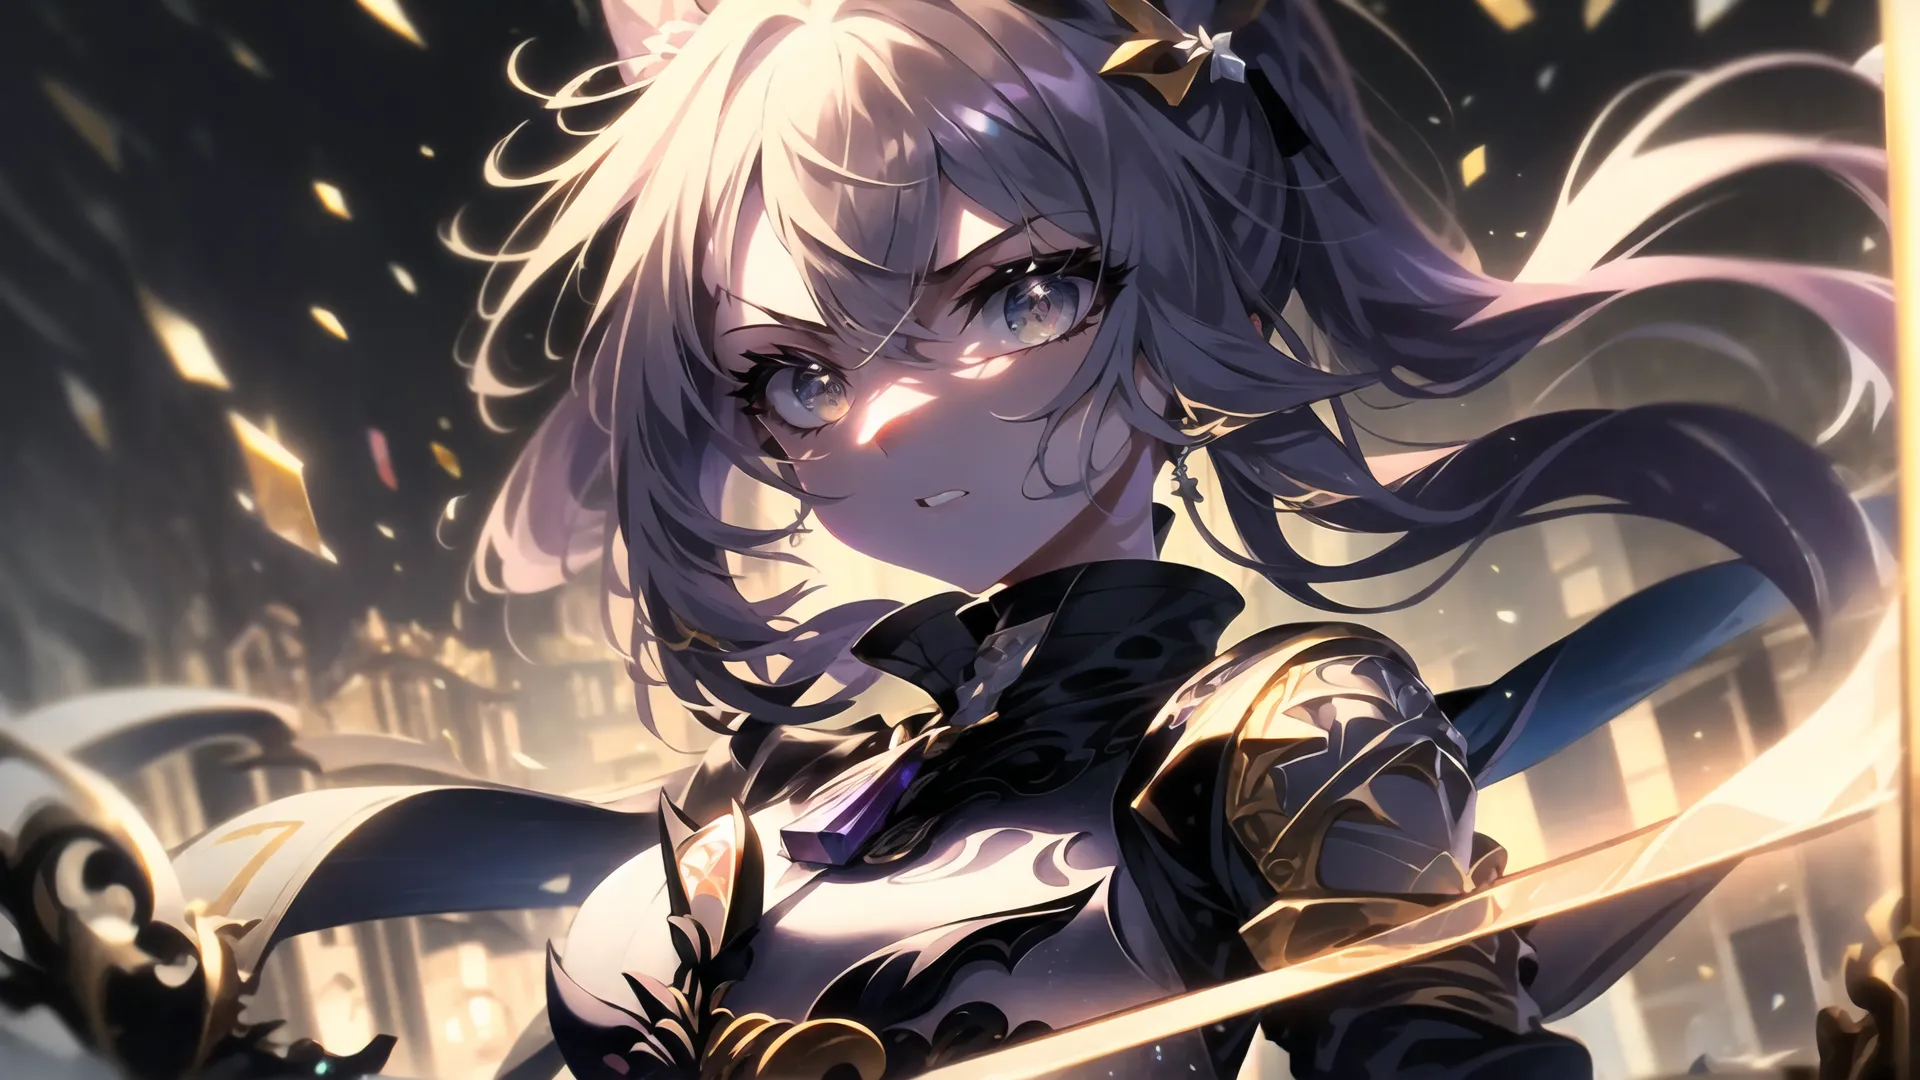 12 Keqing Live Wallpapers, Animated Wallpapers - MoeWalls